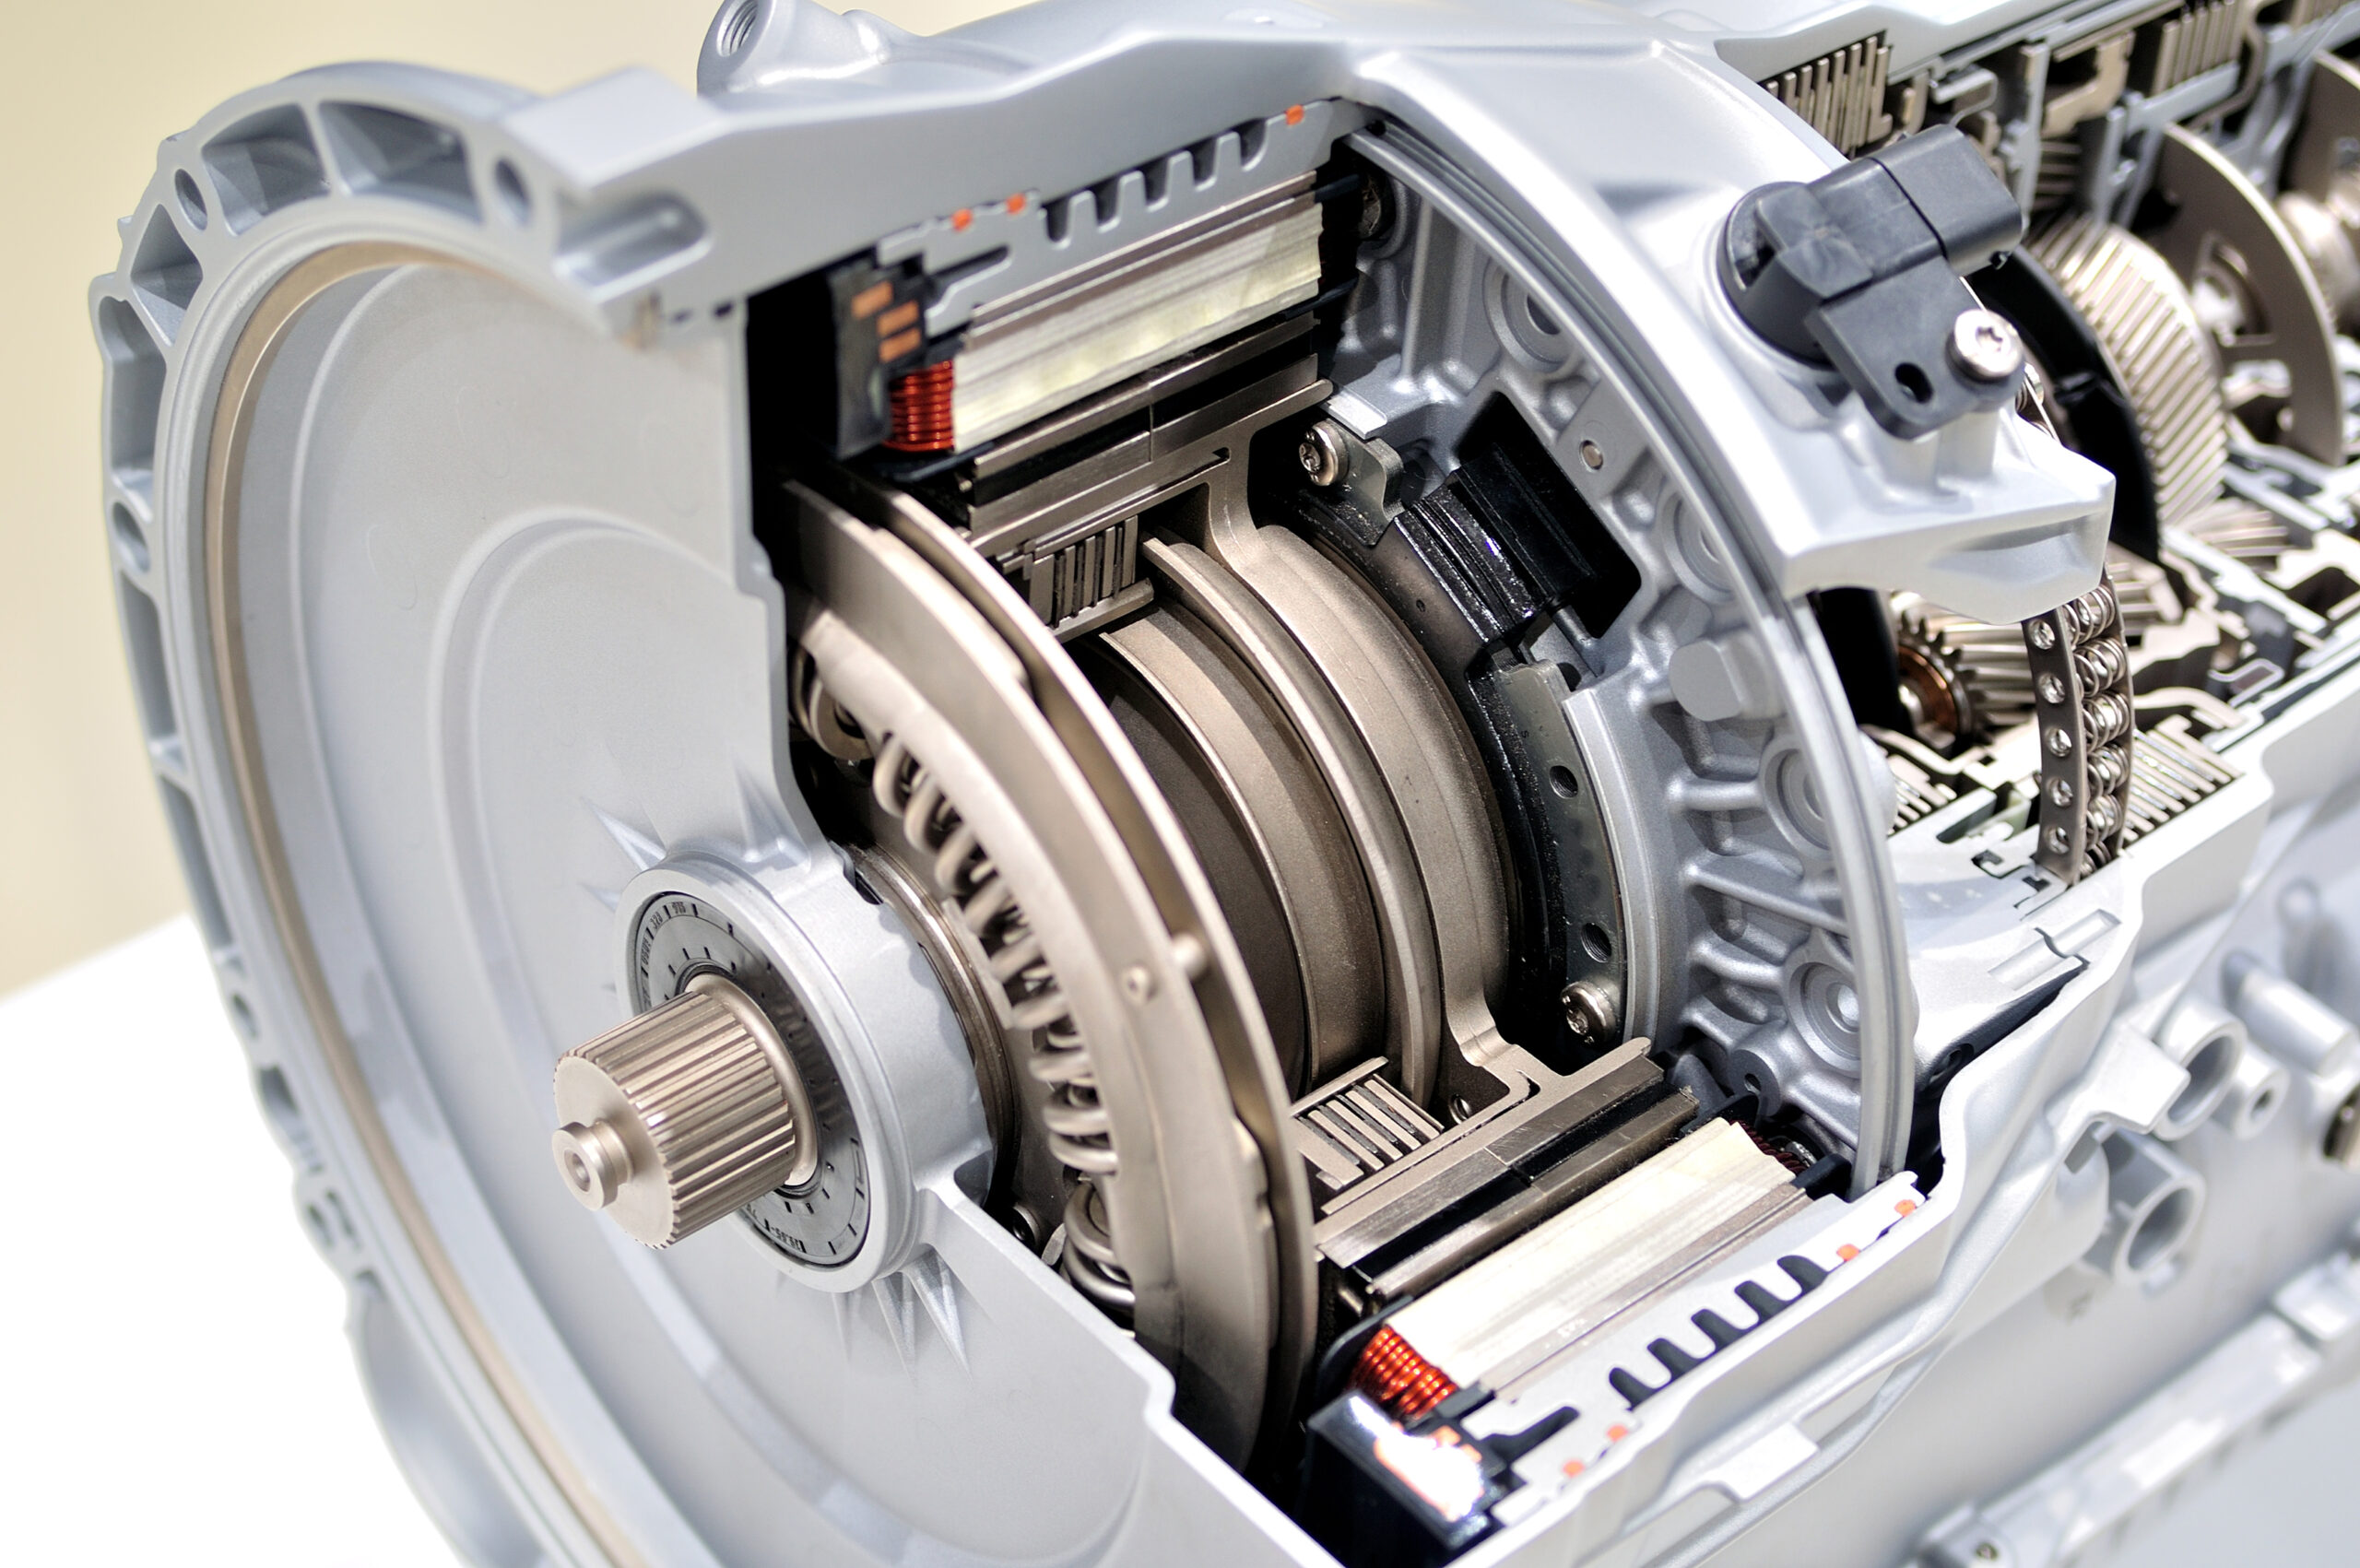 Cross-section view of an automatic transmission